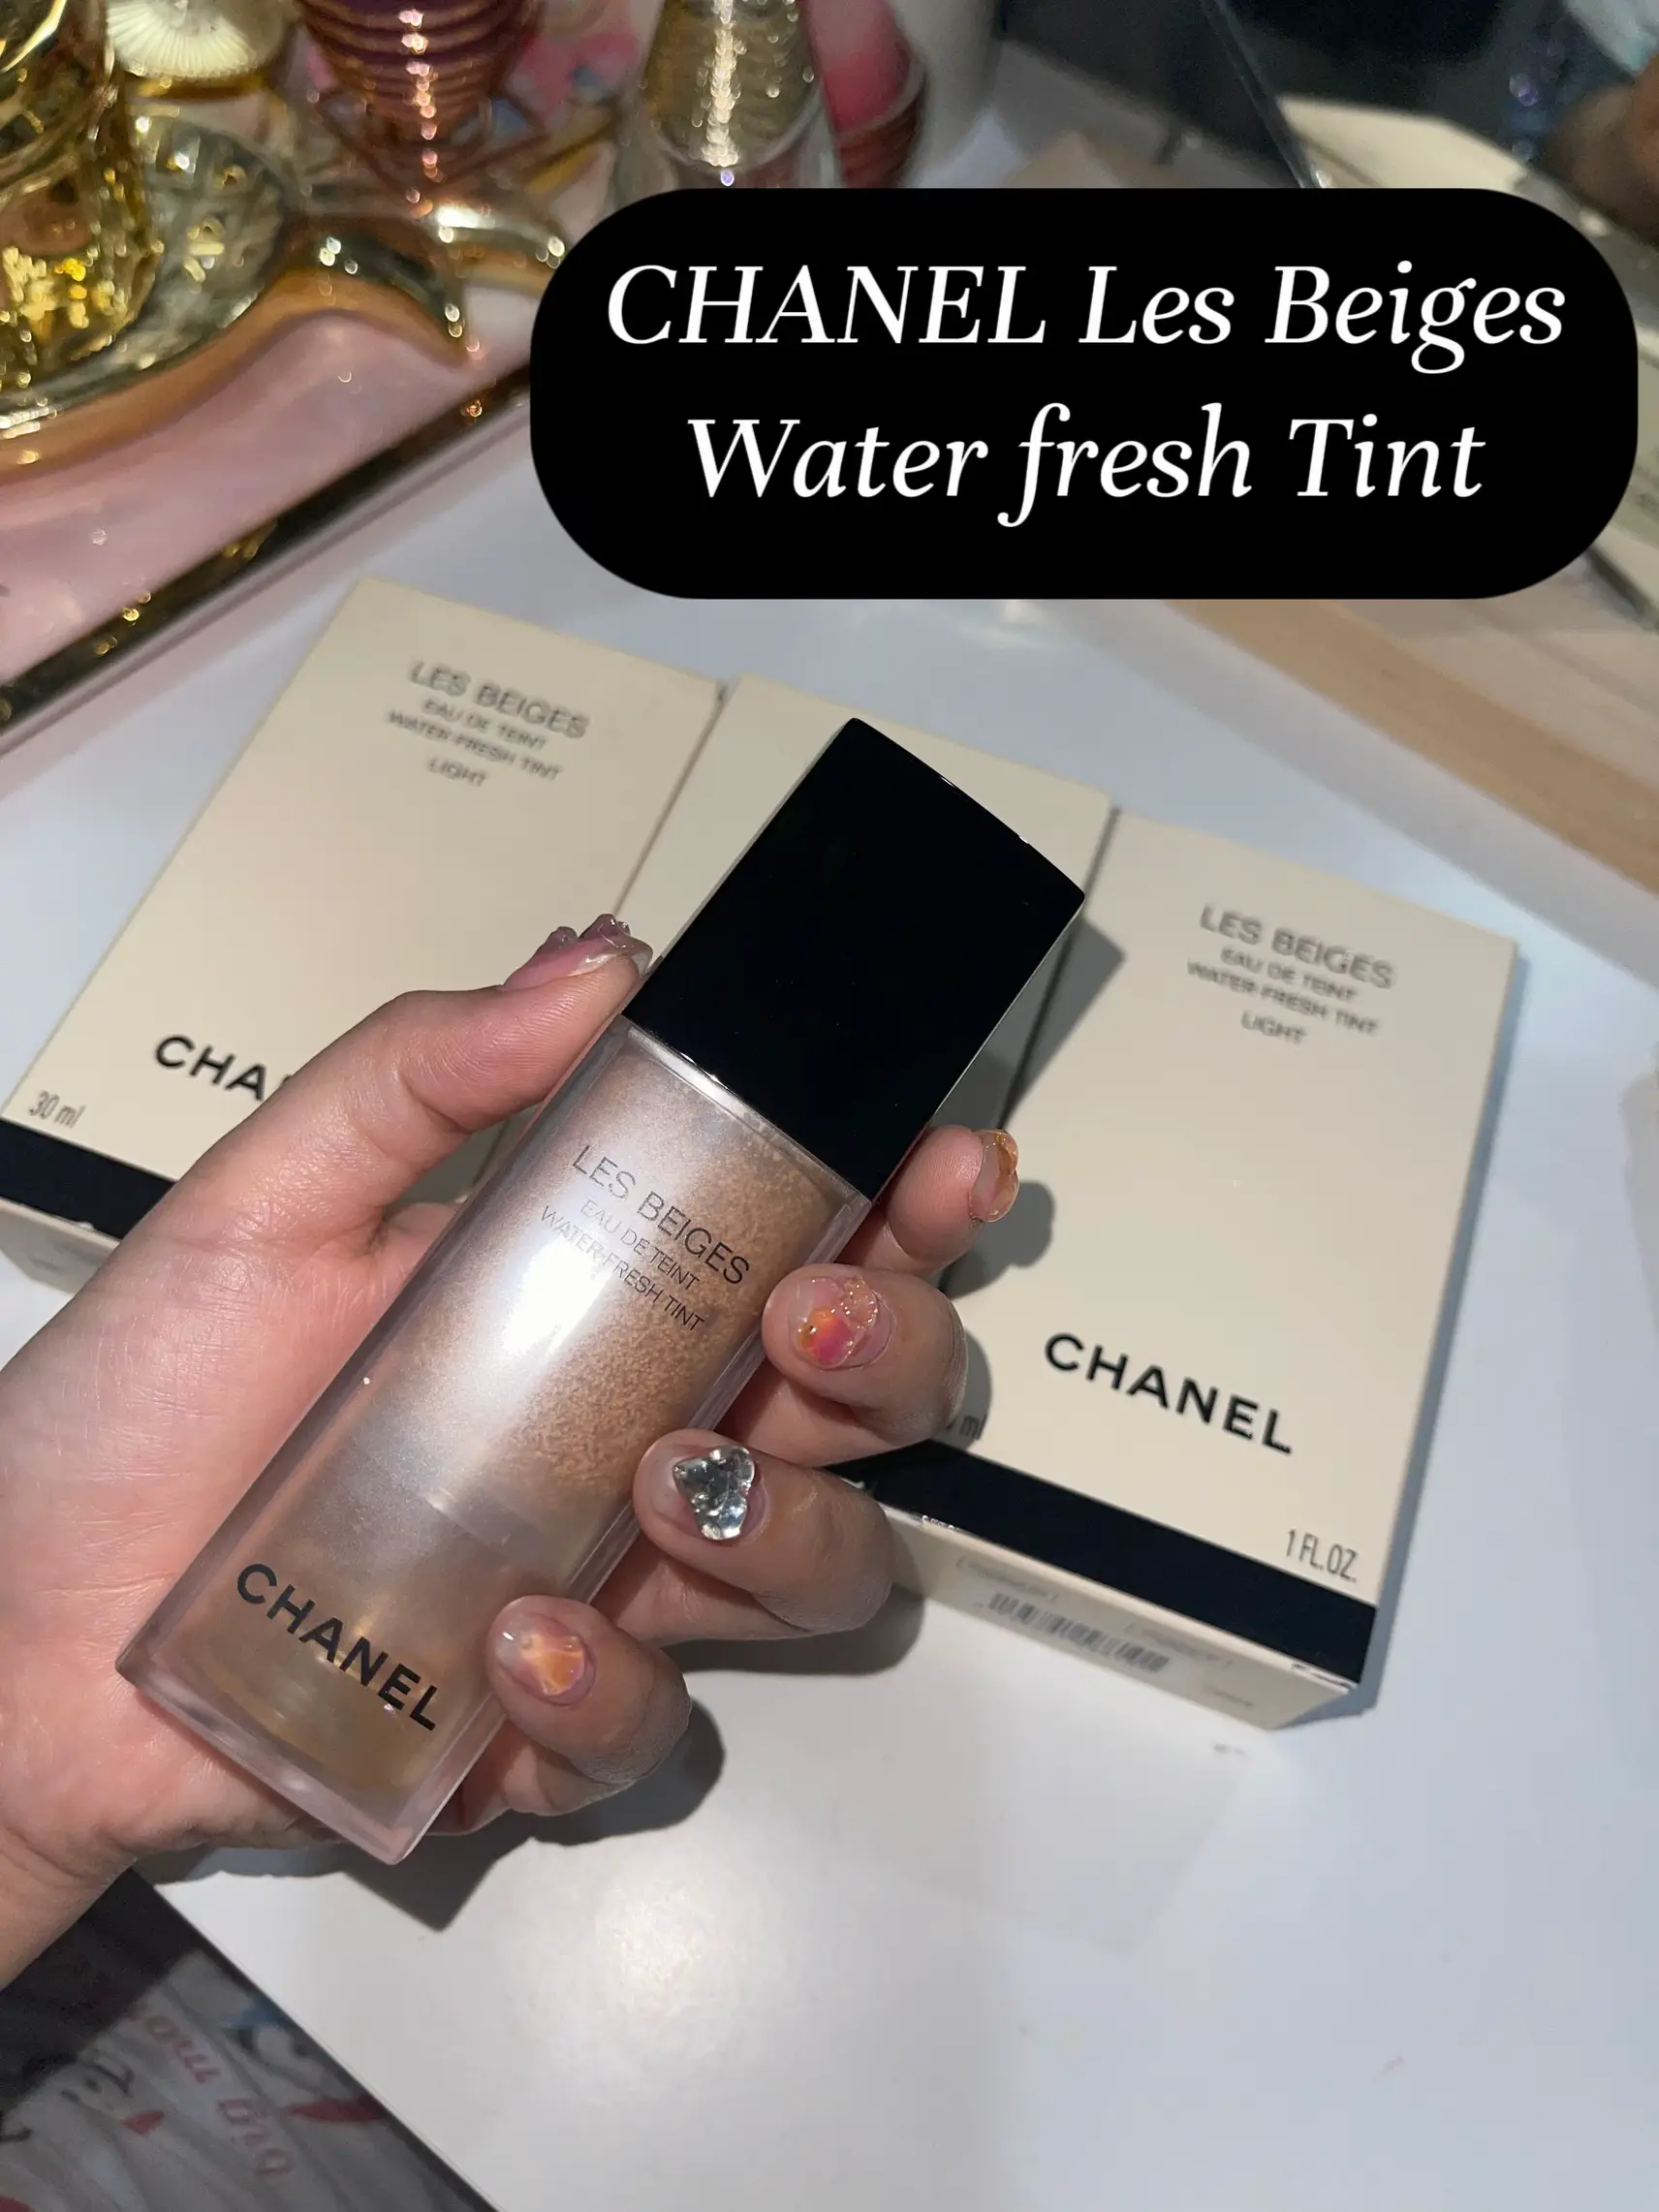 Chanel Les Beiges Water Fresh Foundation Is Going Viral on TikTok